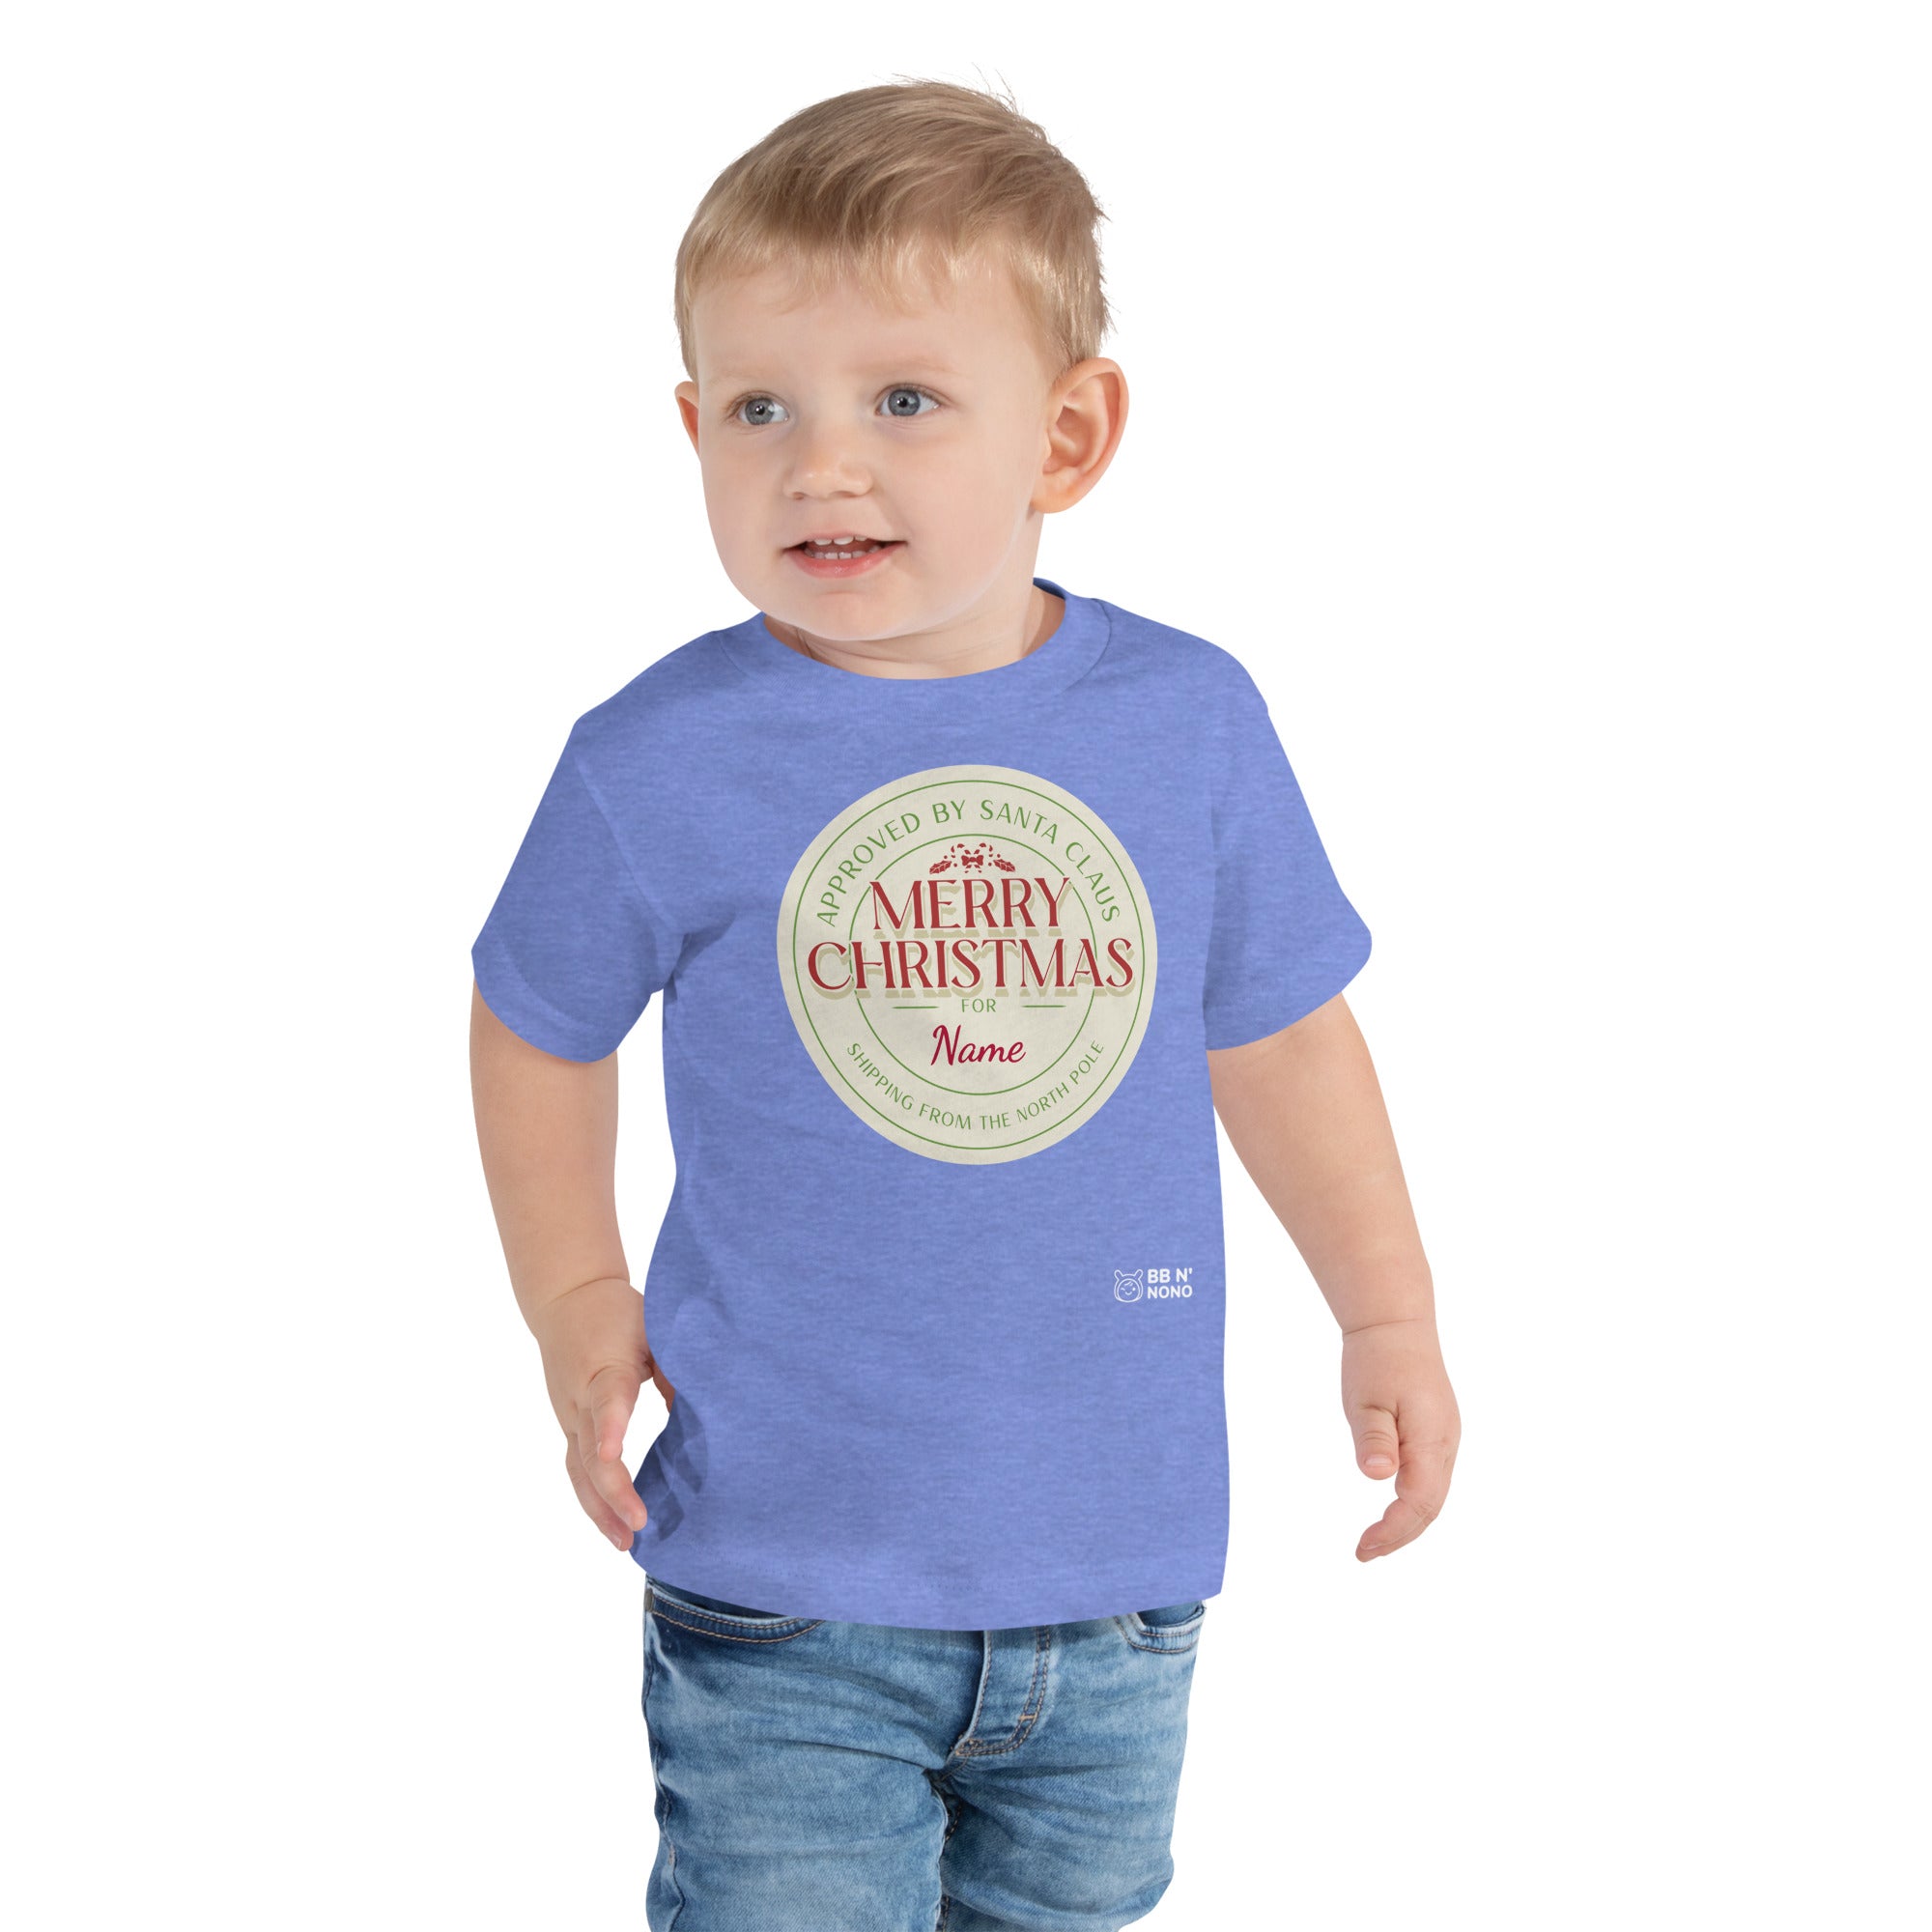 Merry Christmas Personalized Add your Name - Toddler Short Sleeve Tee